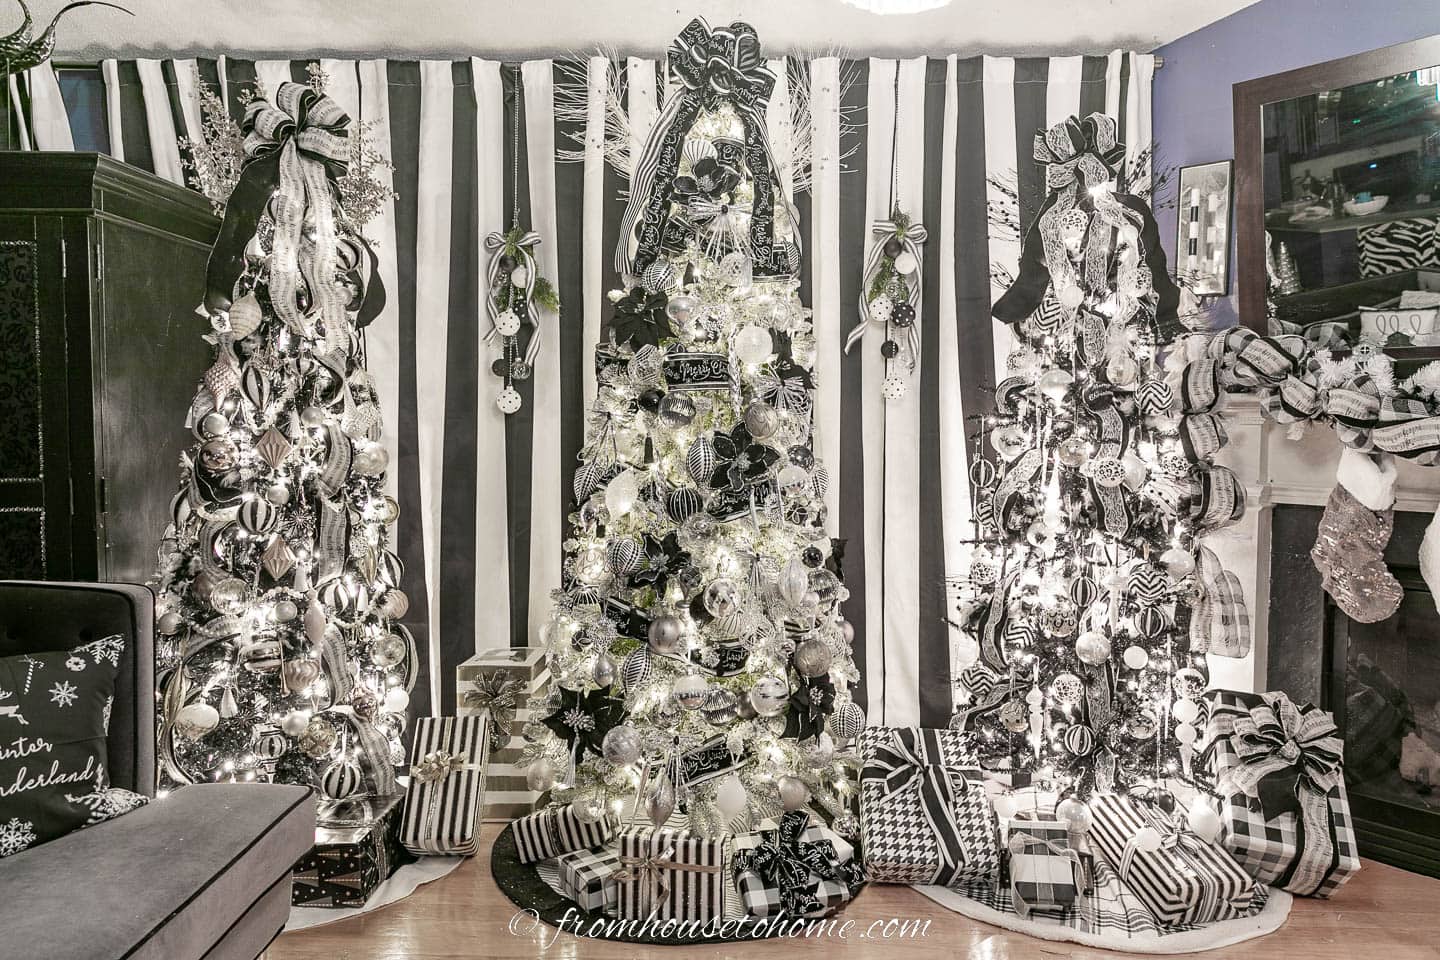 Three black and white Christmas trees with black and white wrapped presents in front of a wall of black and white striped curtains